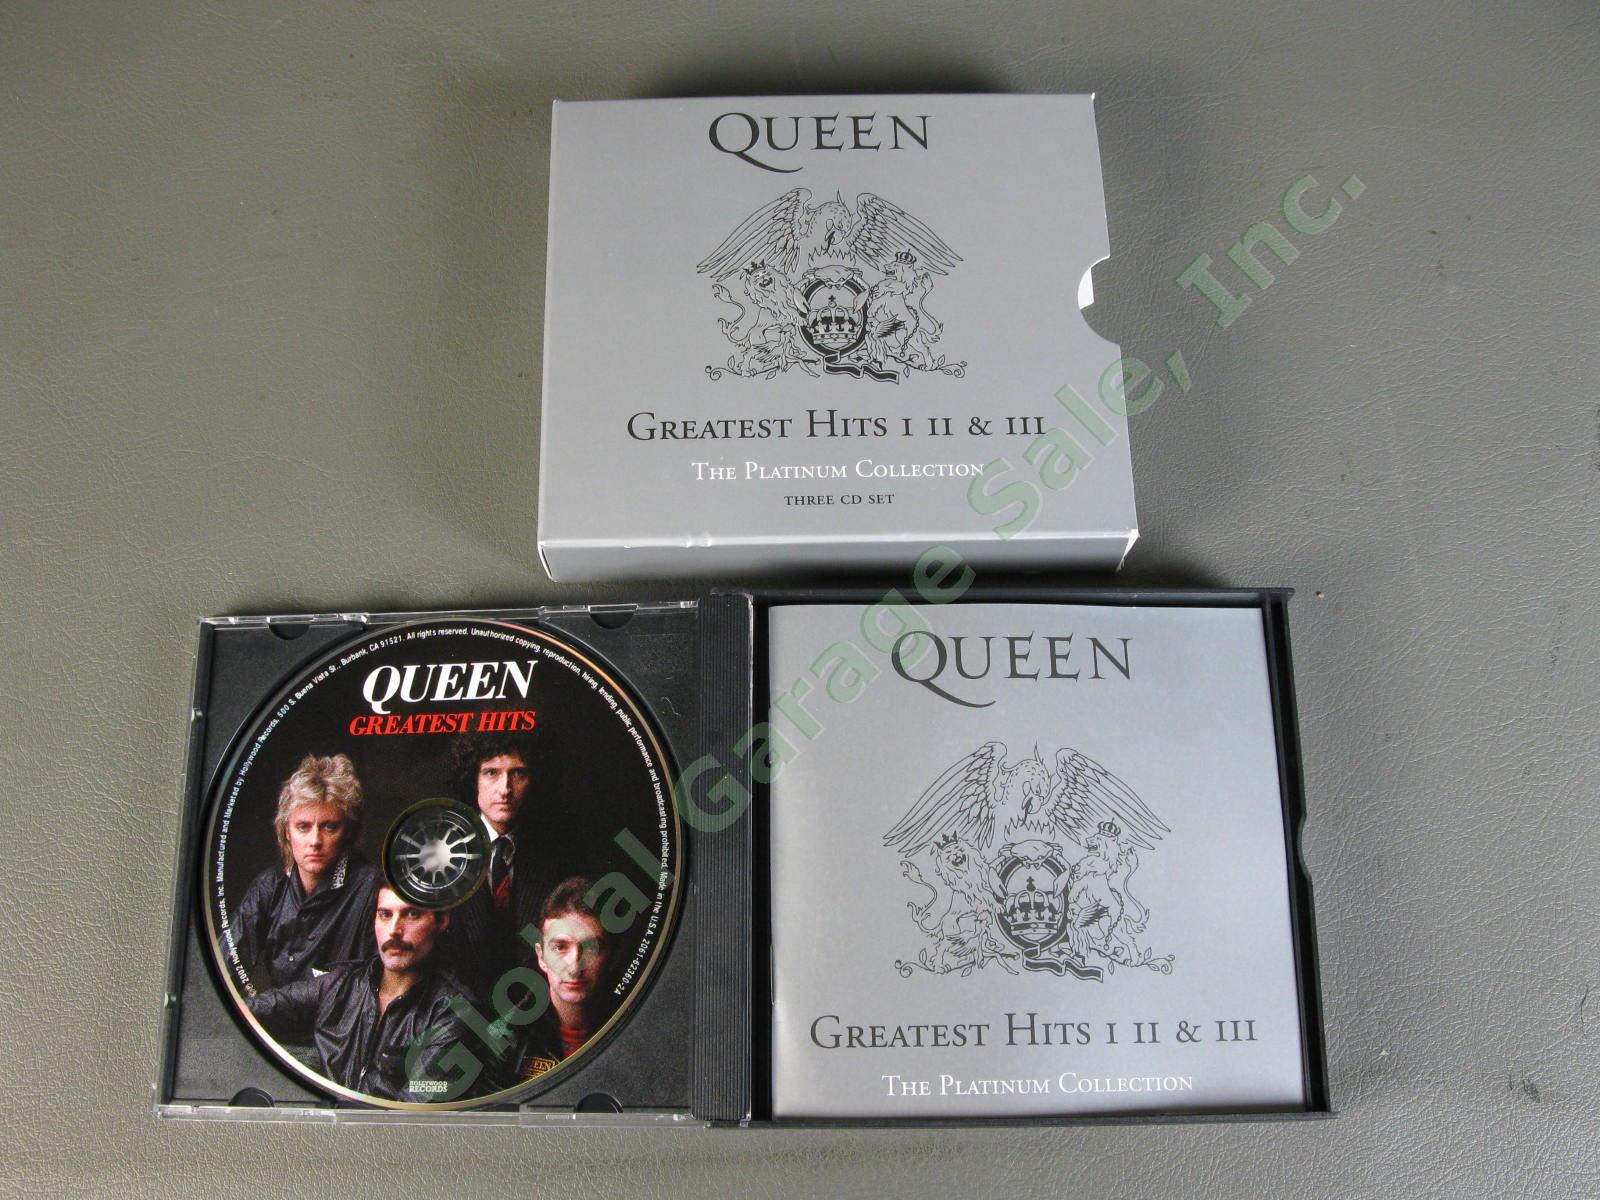 Queen Greatest Hits I II & III The Platinum Collection 3 CD Set Classic Rock NR 4